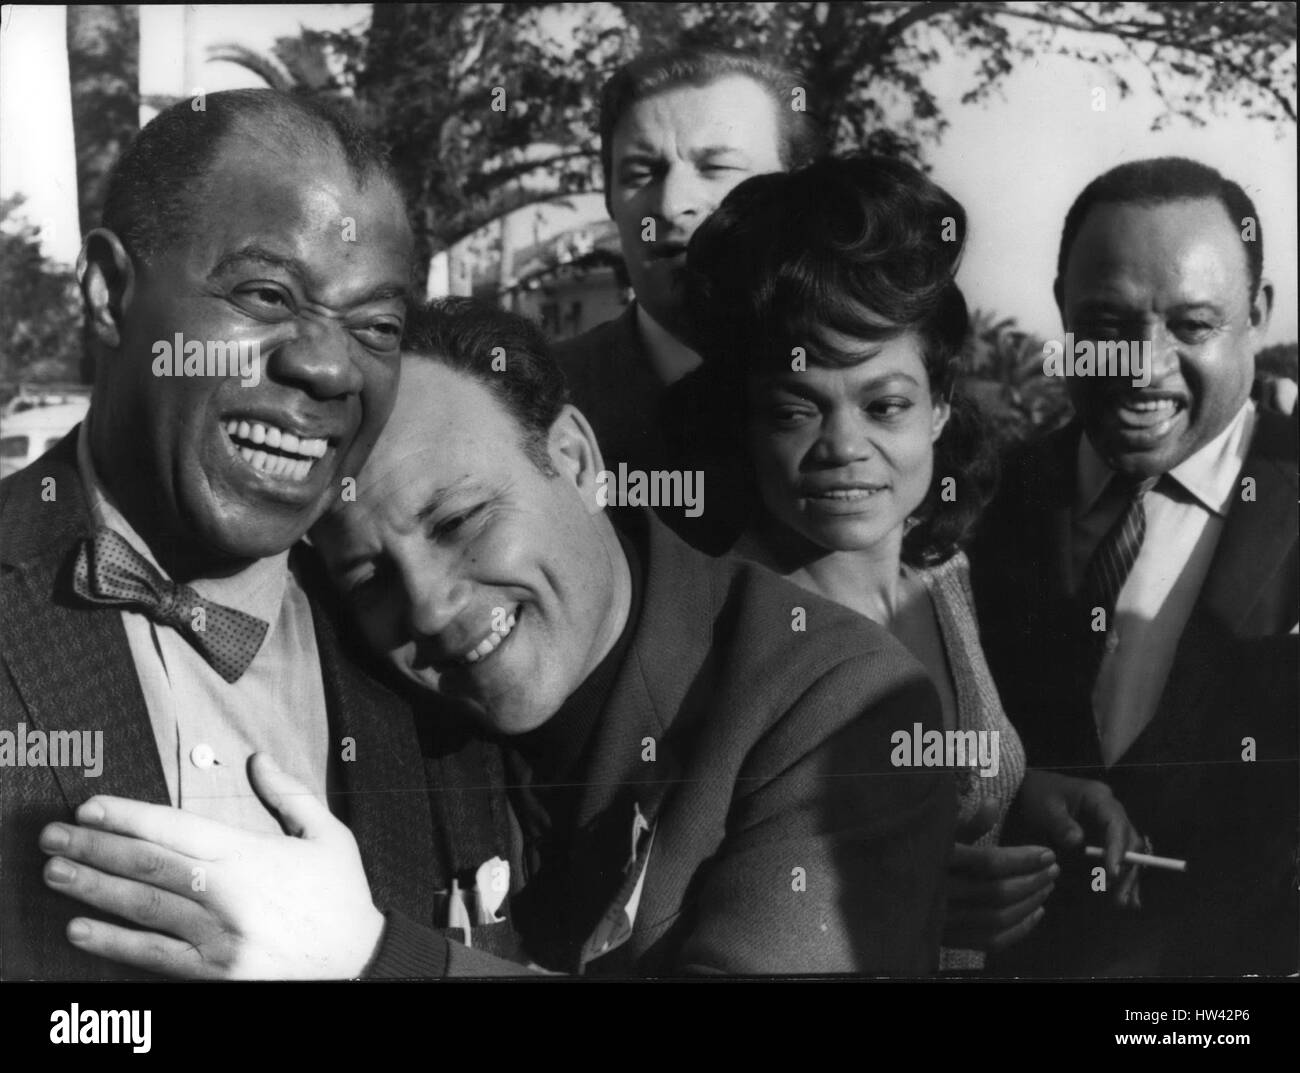 Feb. 02, 1968 - It is began in Sanremo, the fine town of the Riviera, the XVIII Sanramo song Festival several of the biggest singers of the international music are present to the song festival. photo shows From left Louis ''Satchmo'' Armstrong, Italian singer Claudio Villa, Eartha Kitt and Xylophonist lionel Hampton. (Credit Image: © Keystone Press Agency/Keystone USA via ZUMAPRESS.com) Stock Photo